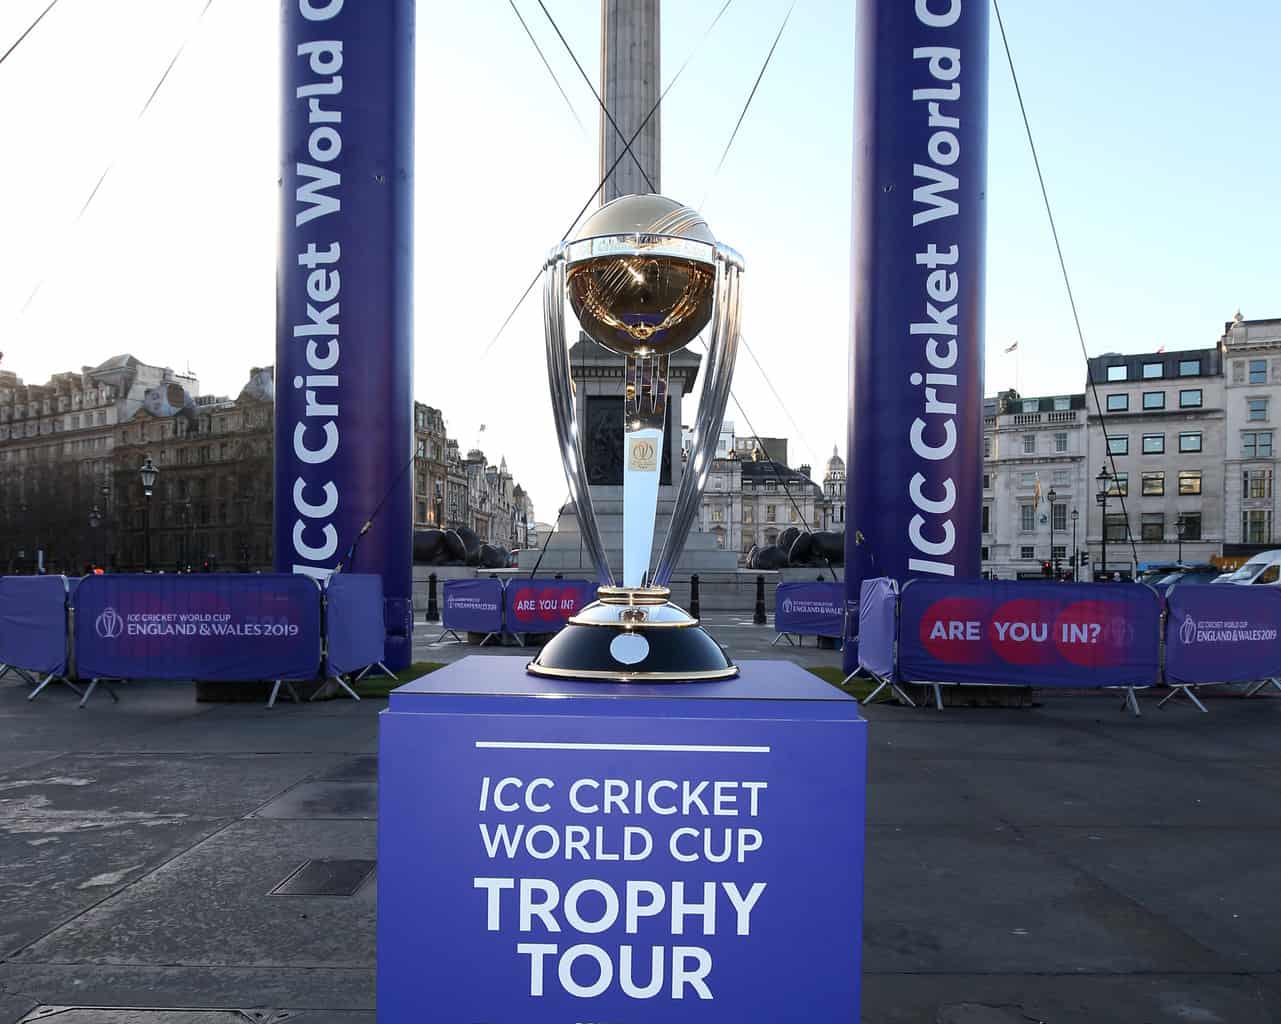 Cricket World Cup: 100 Days to go launch event in Trafalgar Square